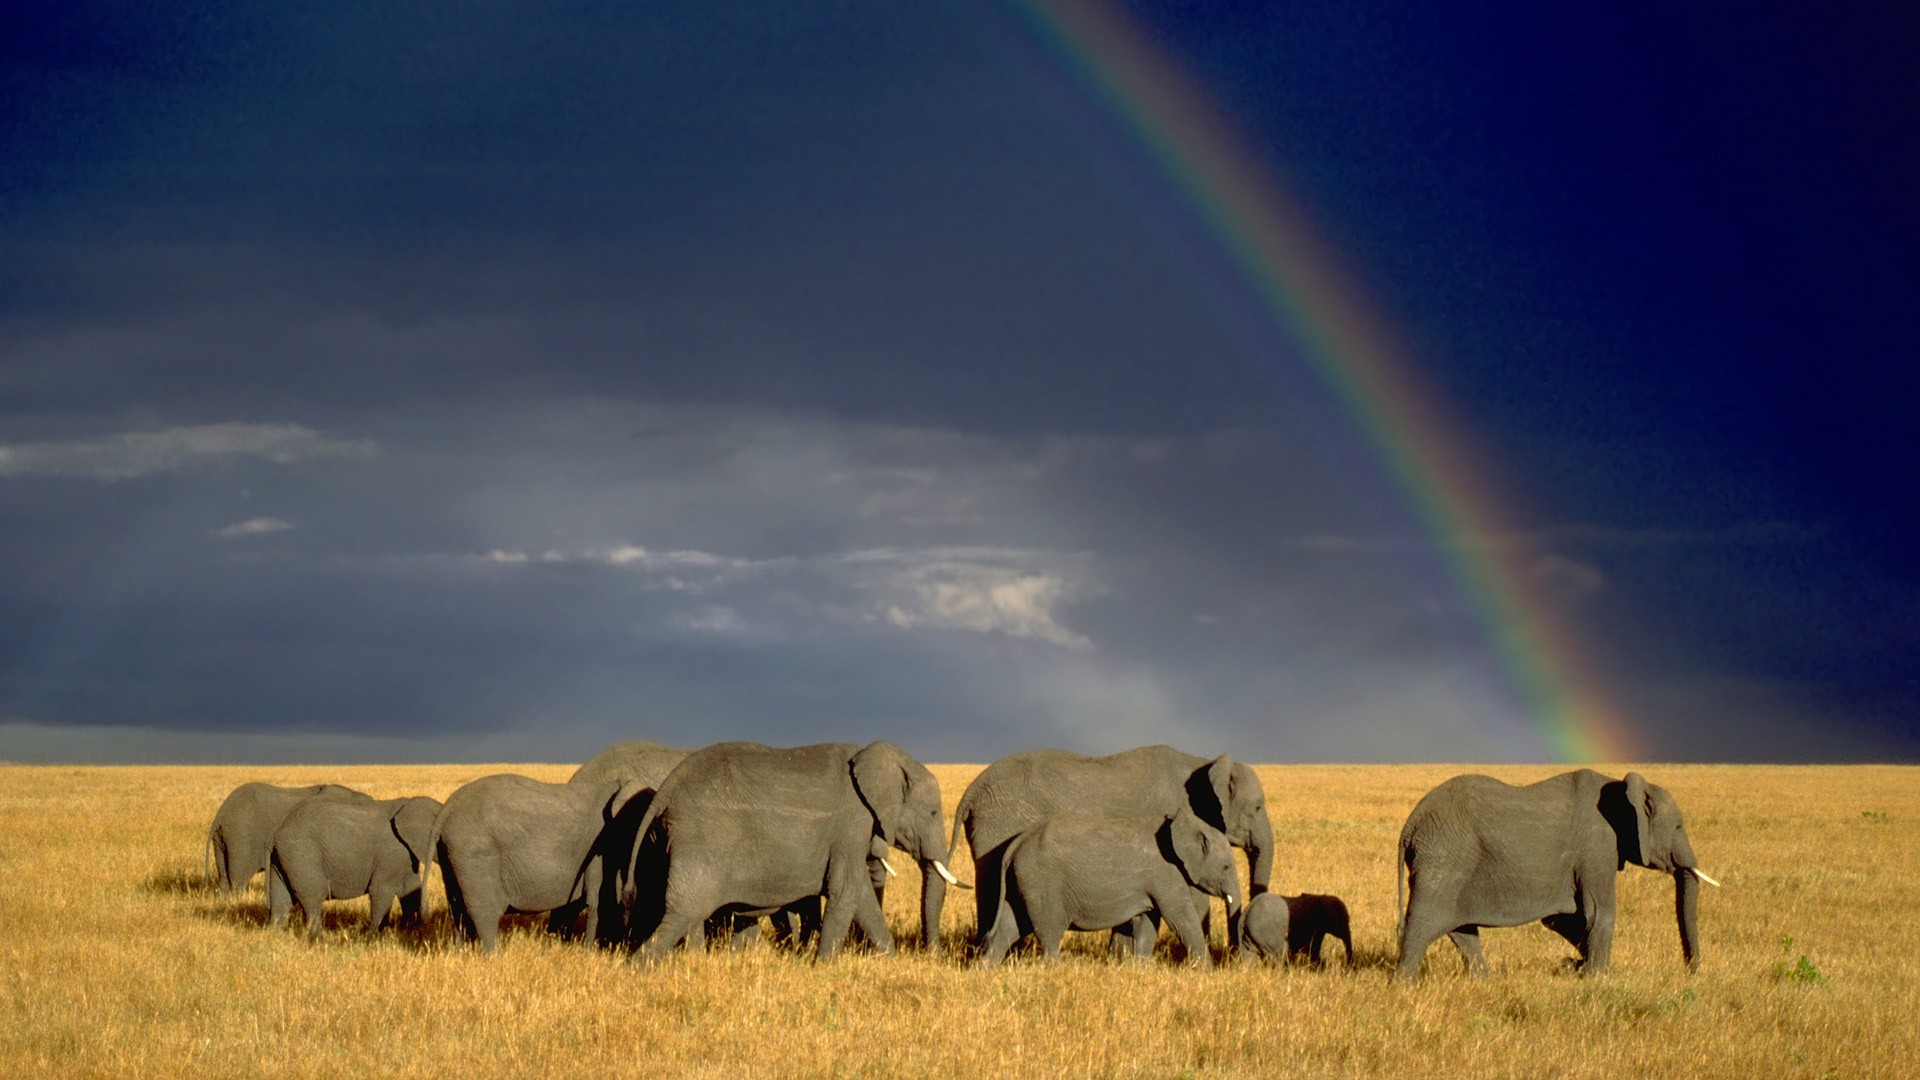 HD Elephant Wallpaper Which Is Under The